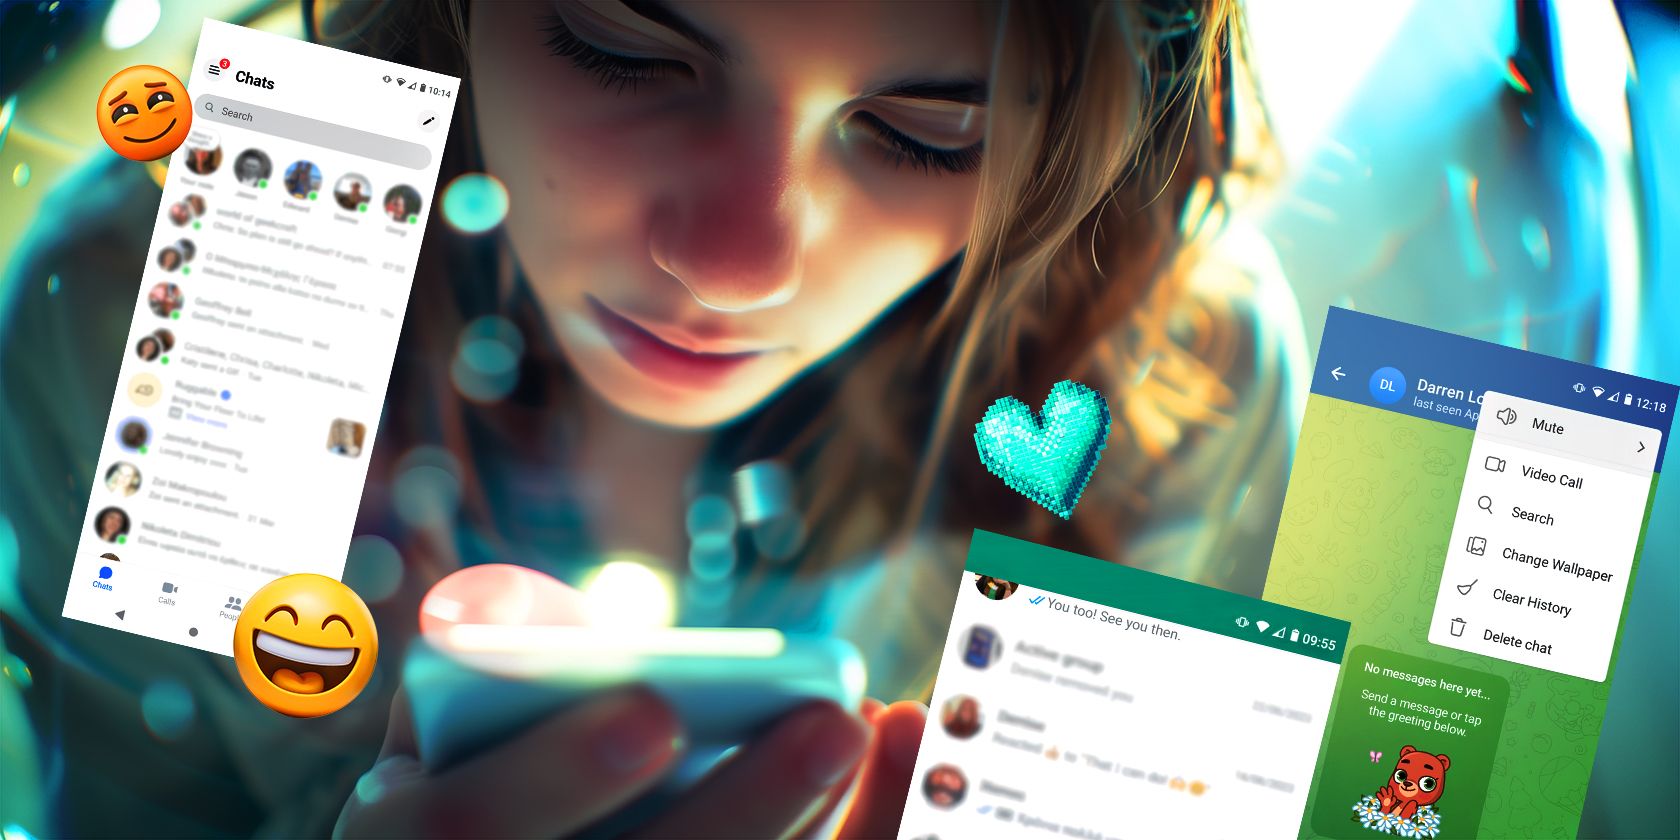 A girl engrossed in her phone with colorful chat app interfaces floating around, highlighted by vibrant, glowing effects.